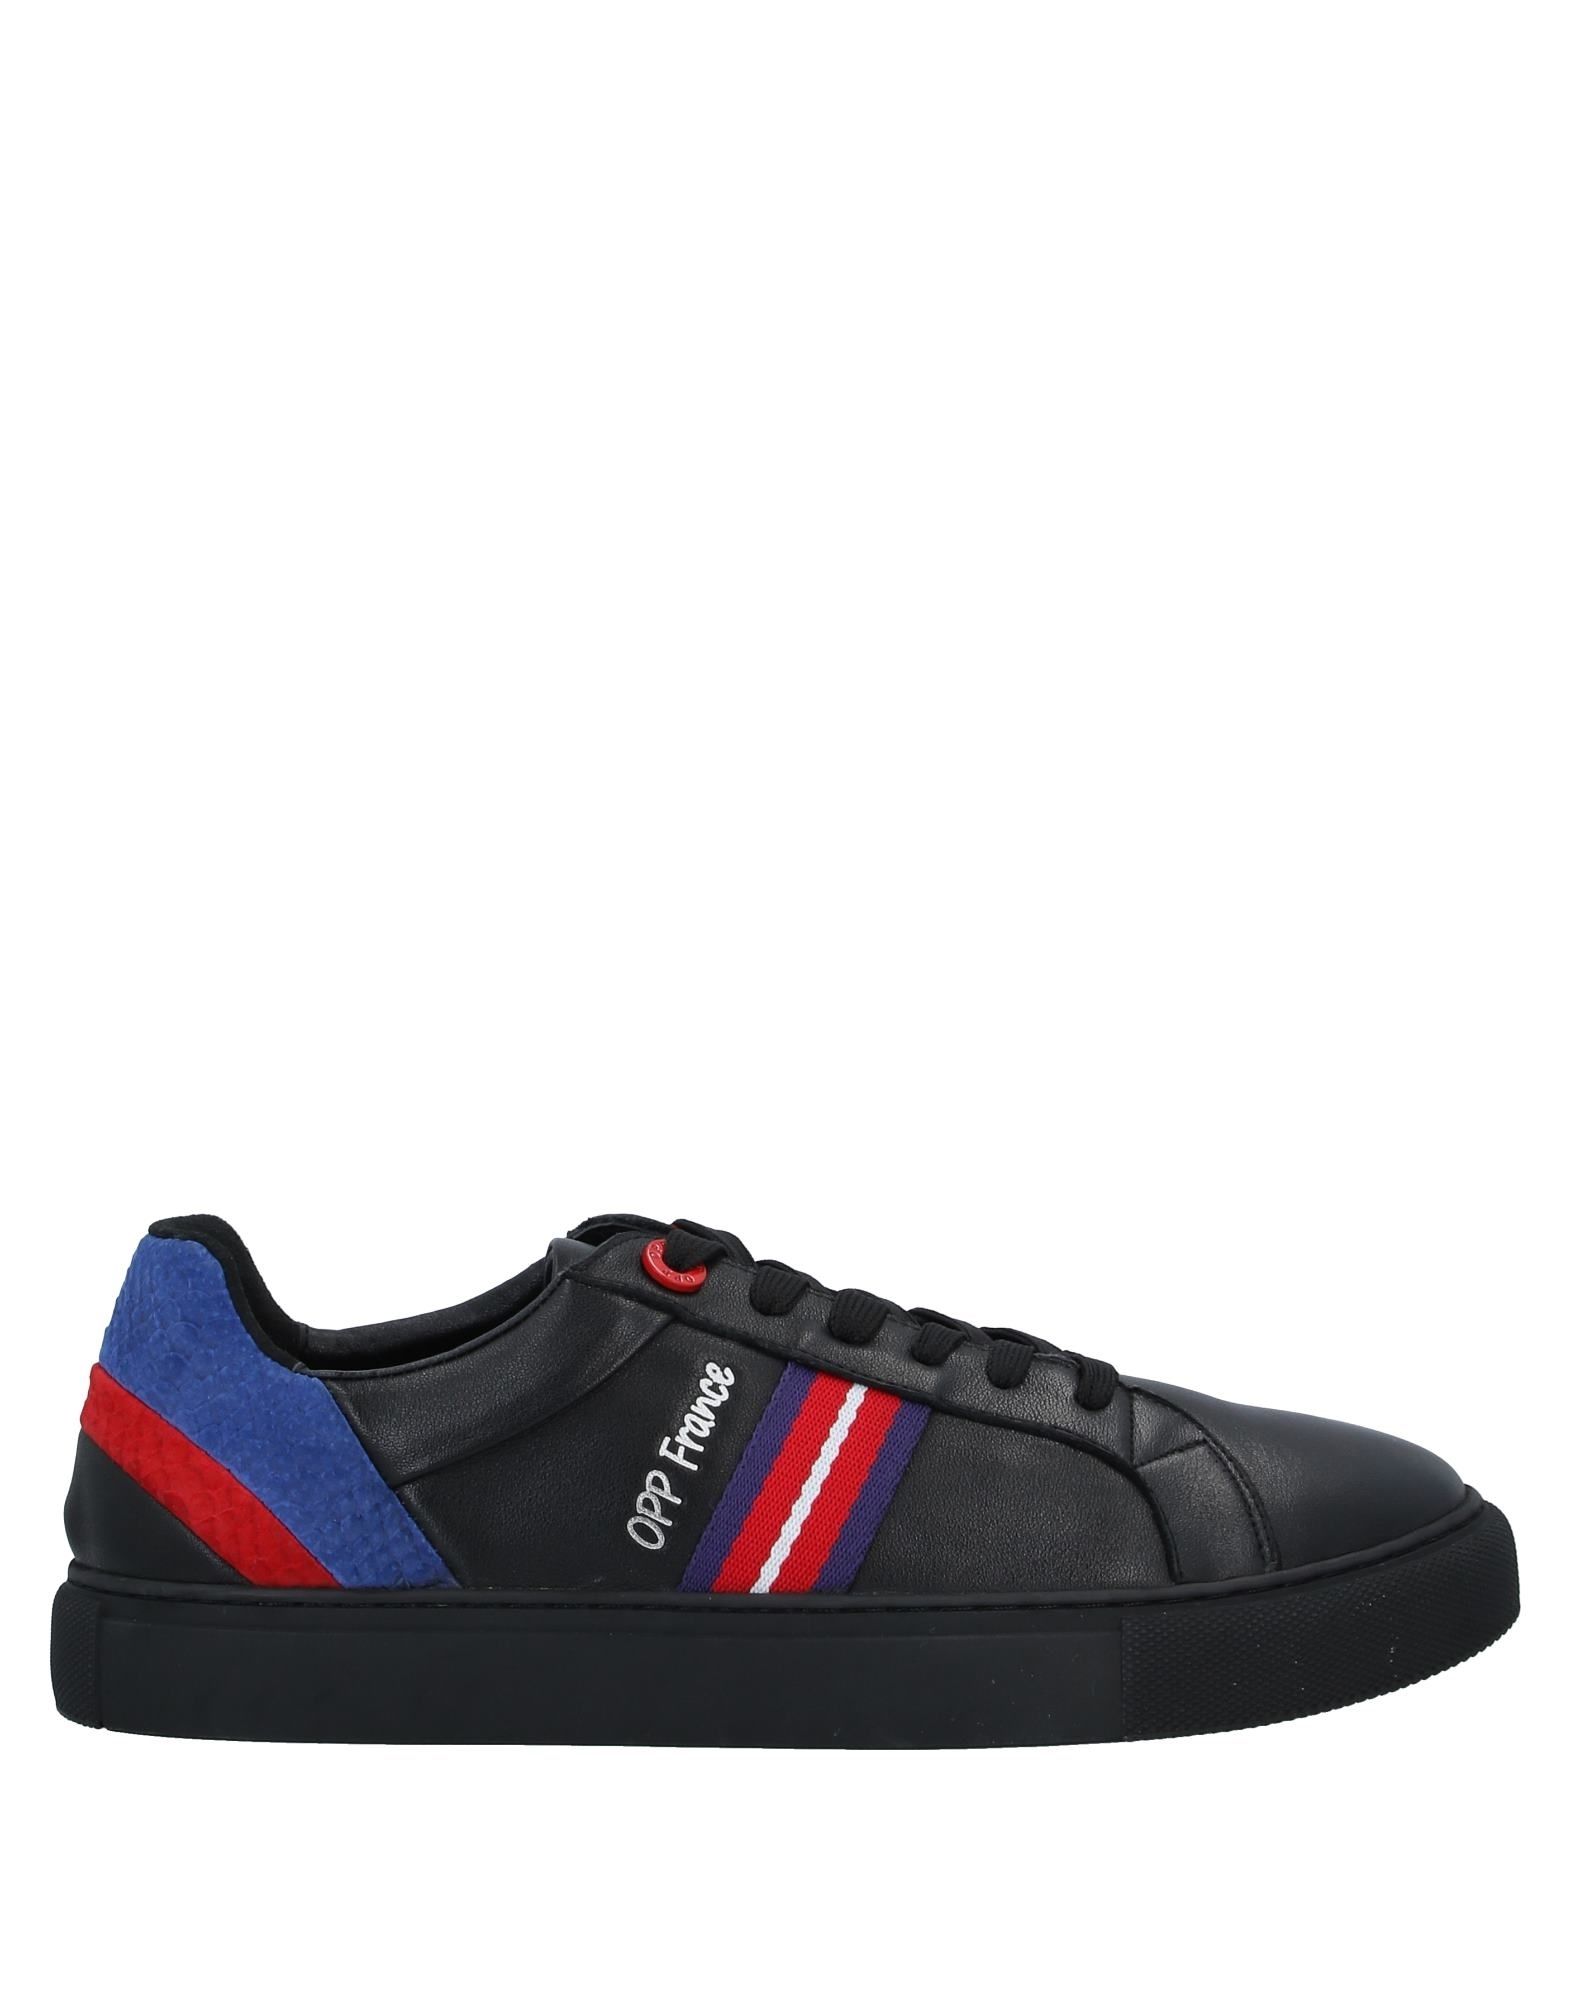 OPP France OPP France Sneakers from yoox.com | Daily Mail